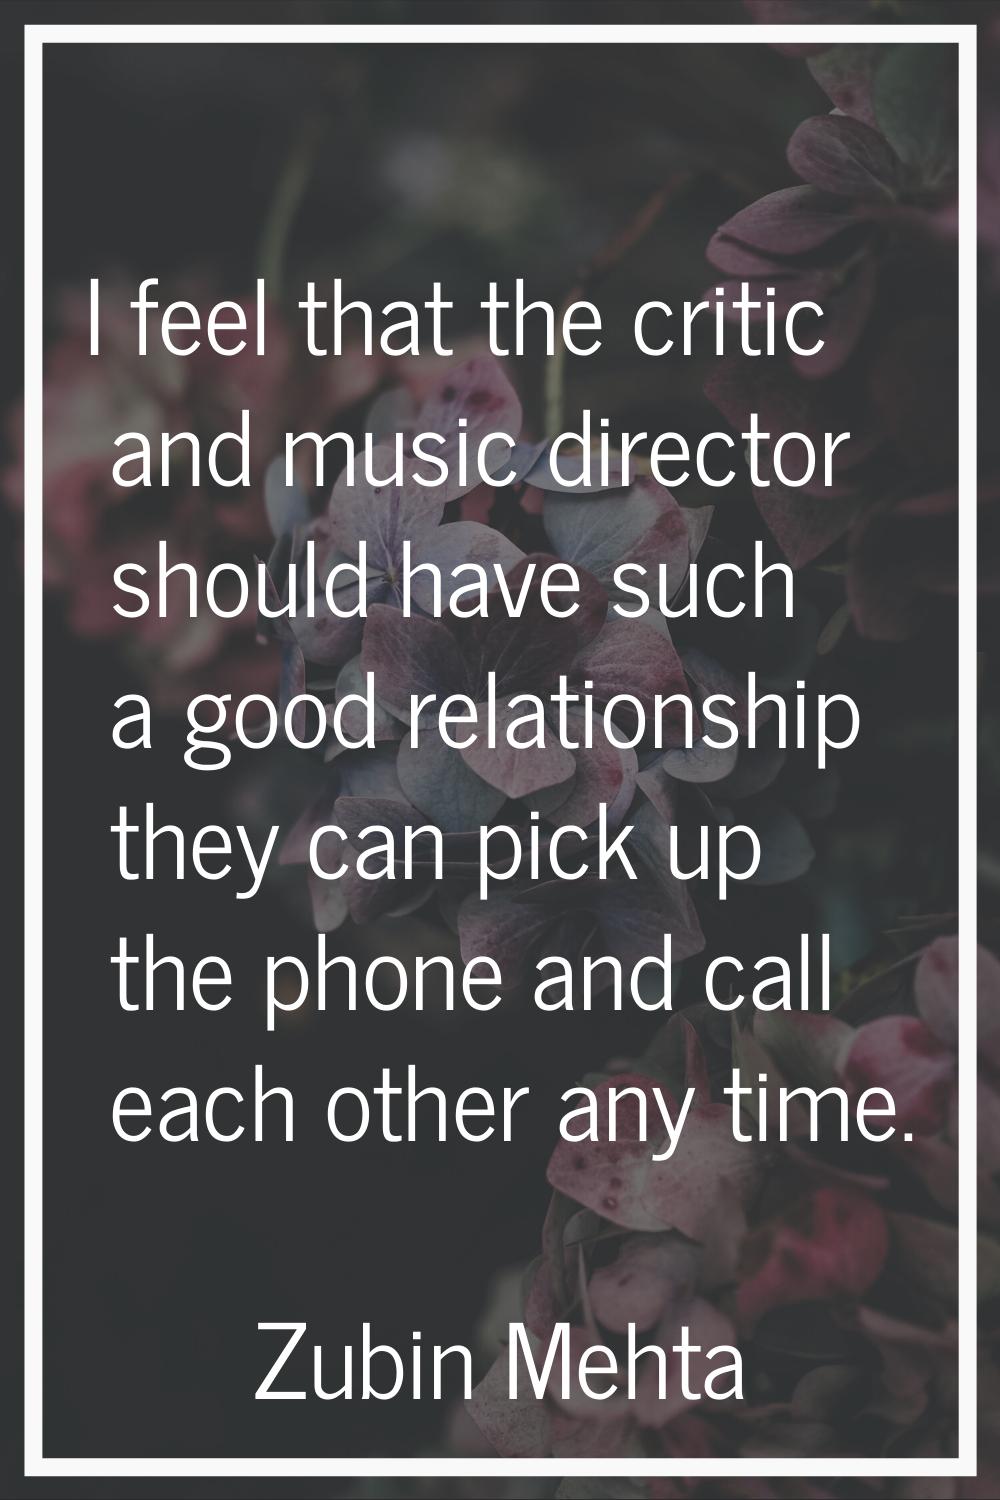 I feel that the critic and music director should have such a good relationship they can pick up the